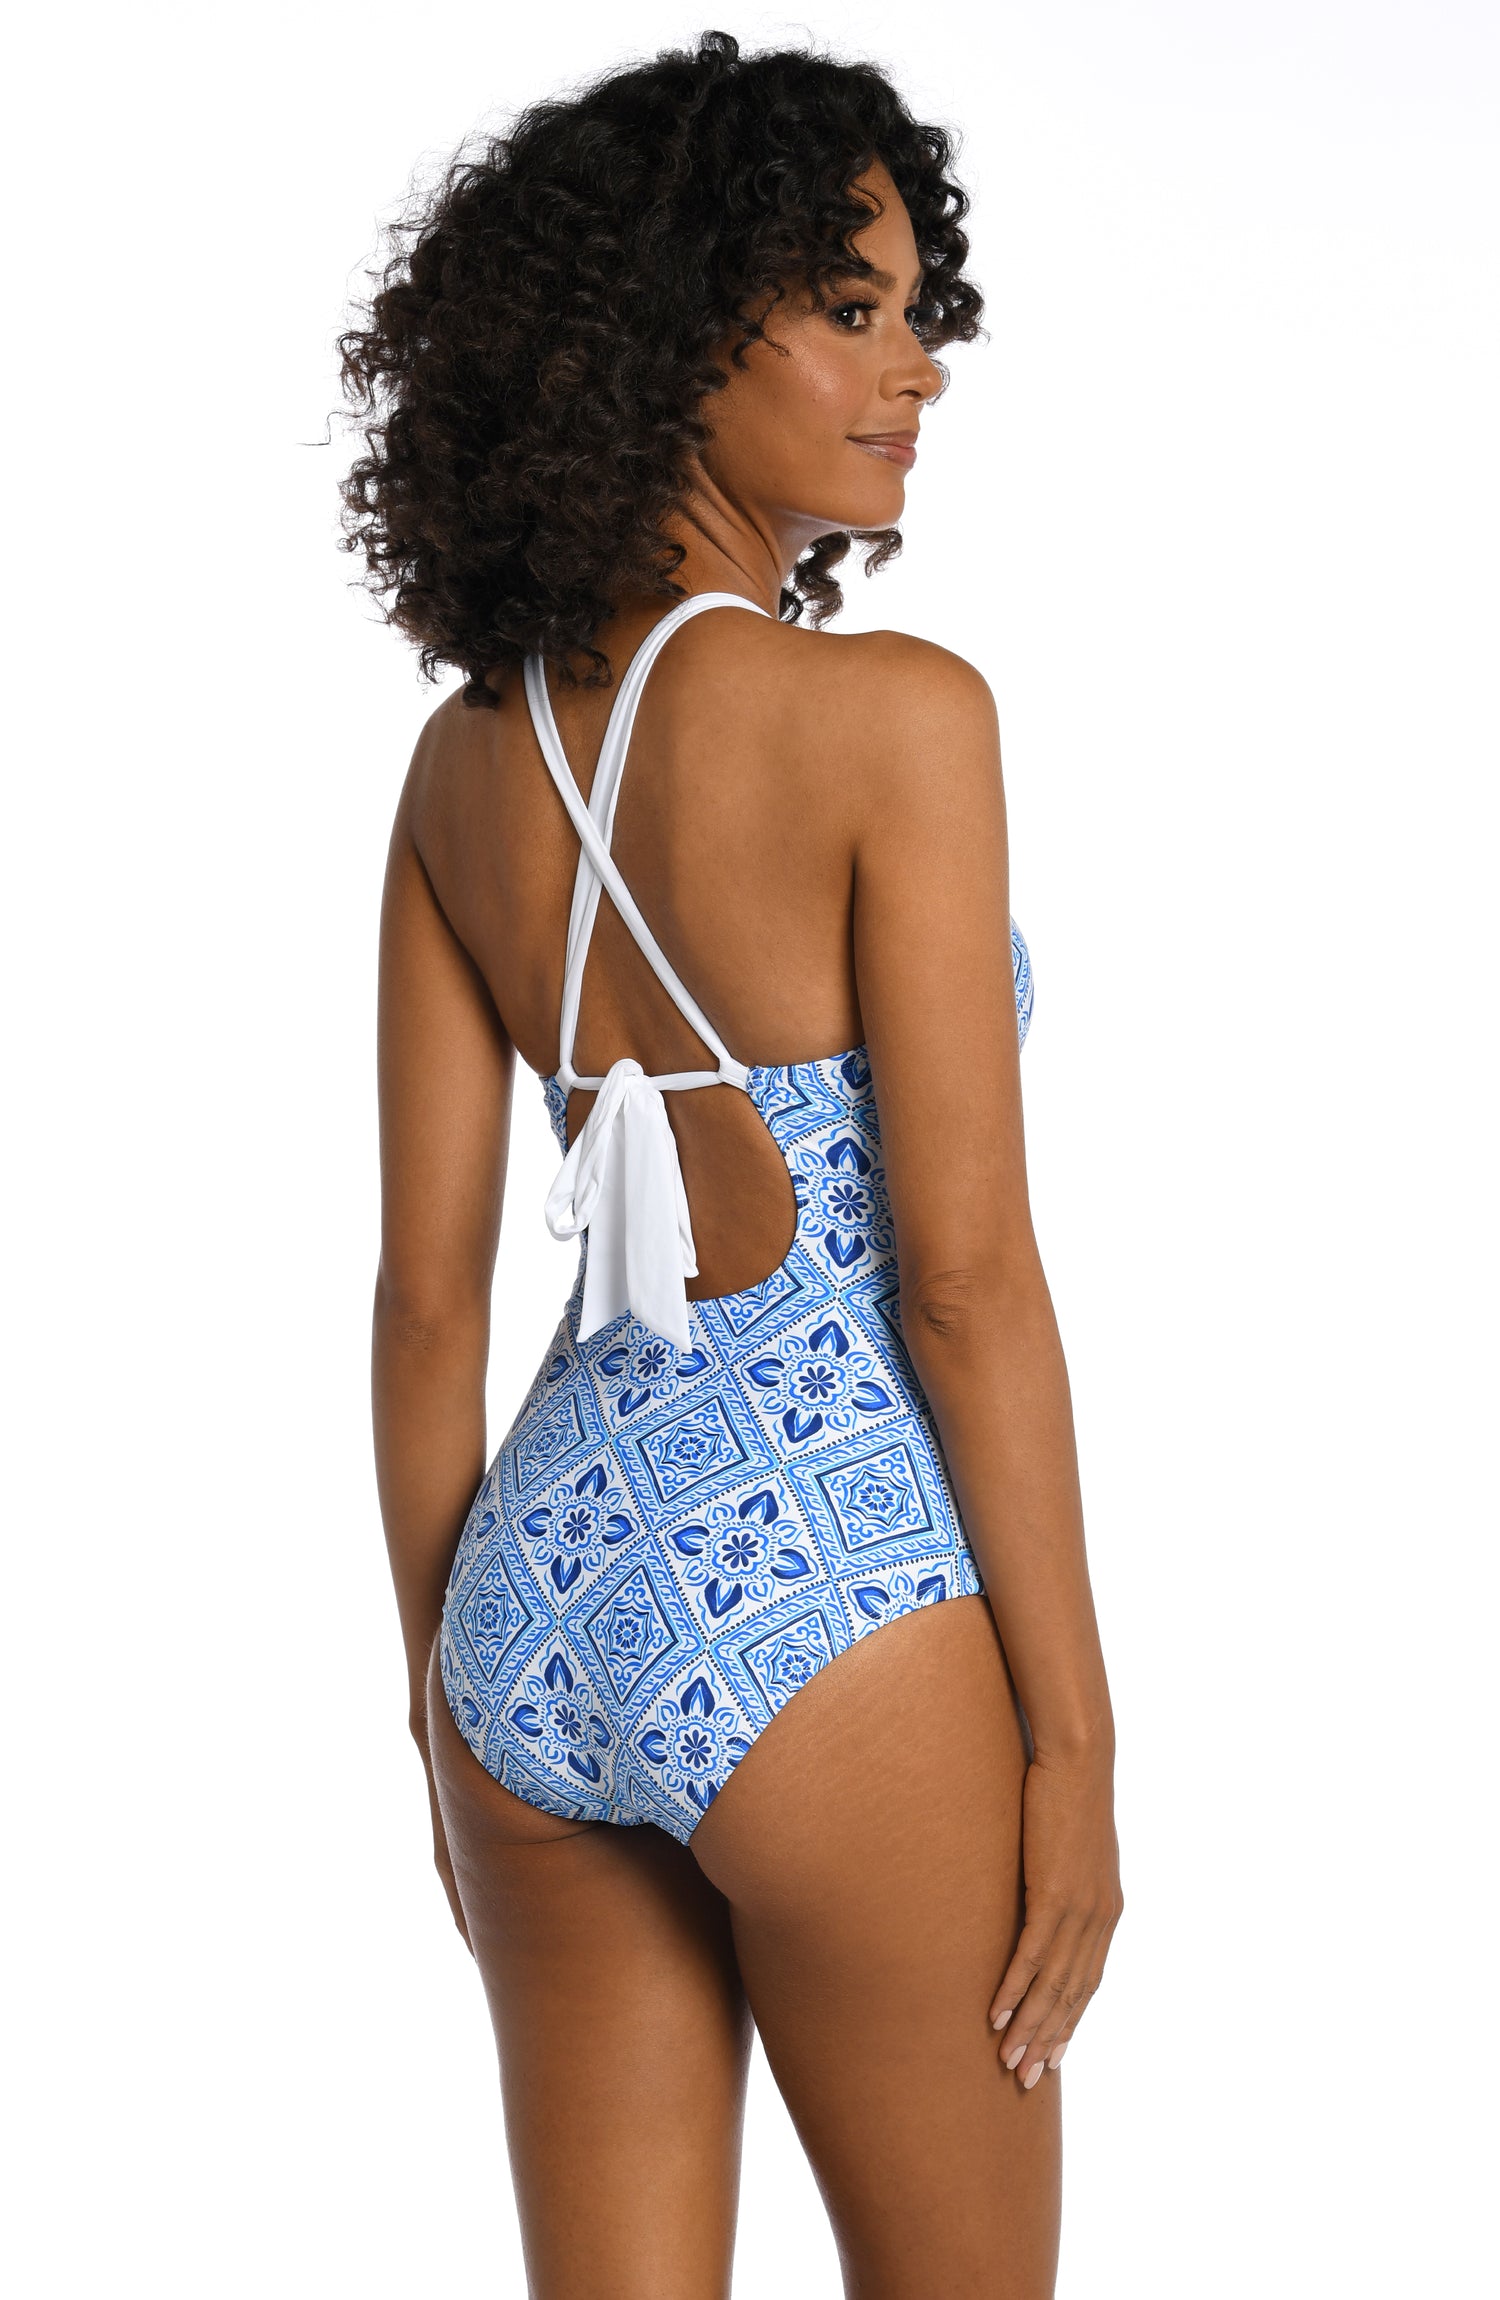 Model is wearing a light blue artful mosaic printed one piece swimsuit from our Mediterranean Breeze collection.